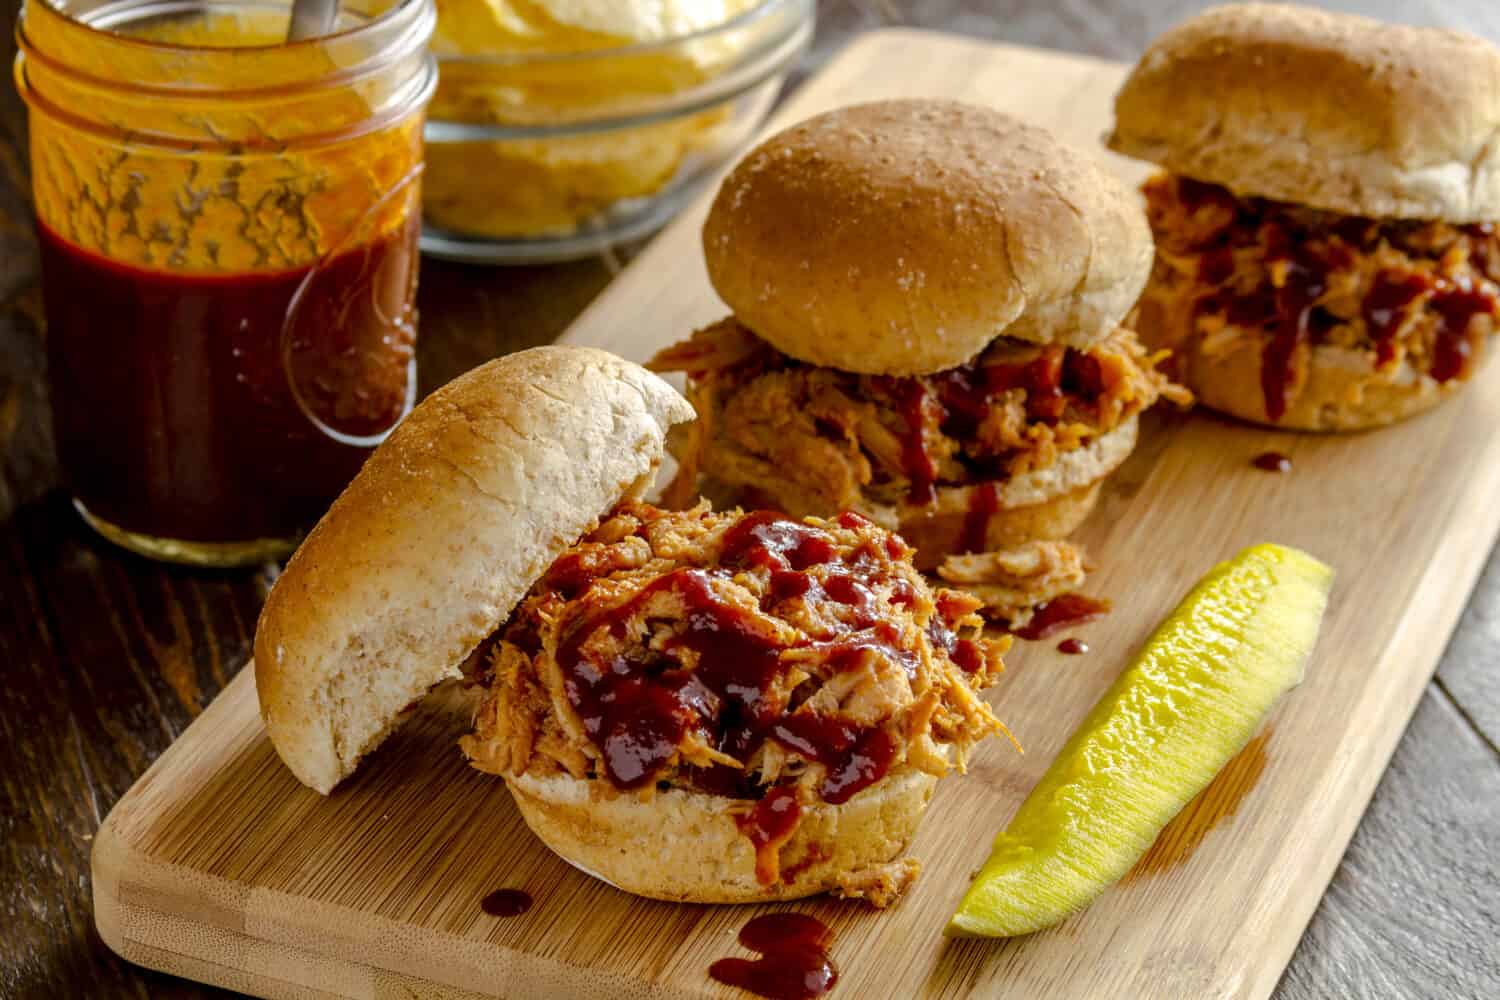 Three pulled pork barbeque sliders sitting on wooden cutting board with dill pickle with bottle of sauce and bowl of potato chips